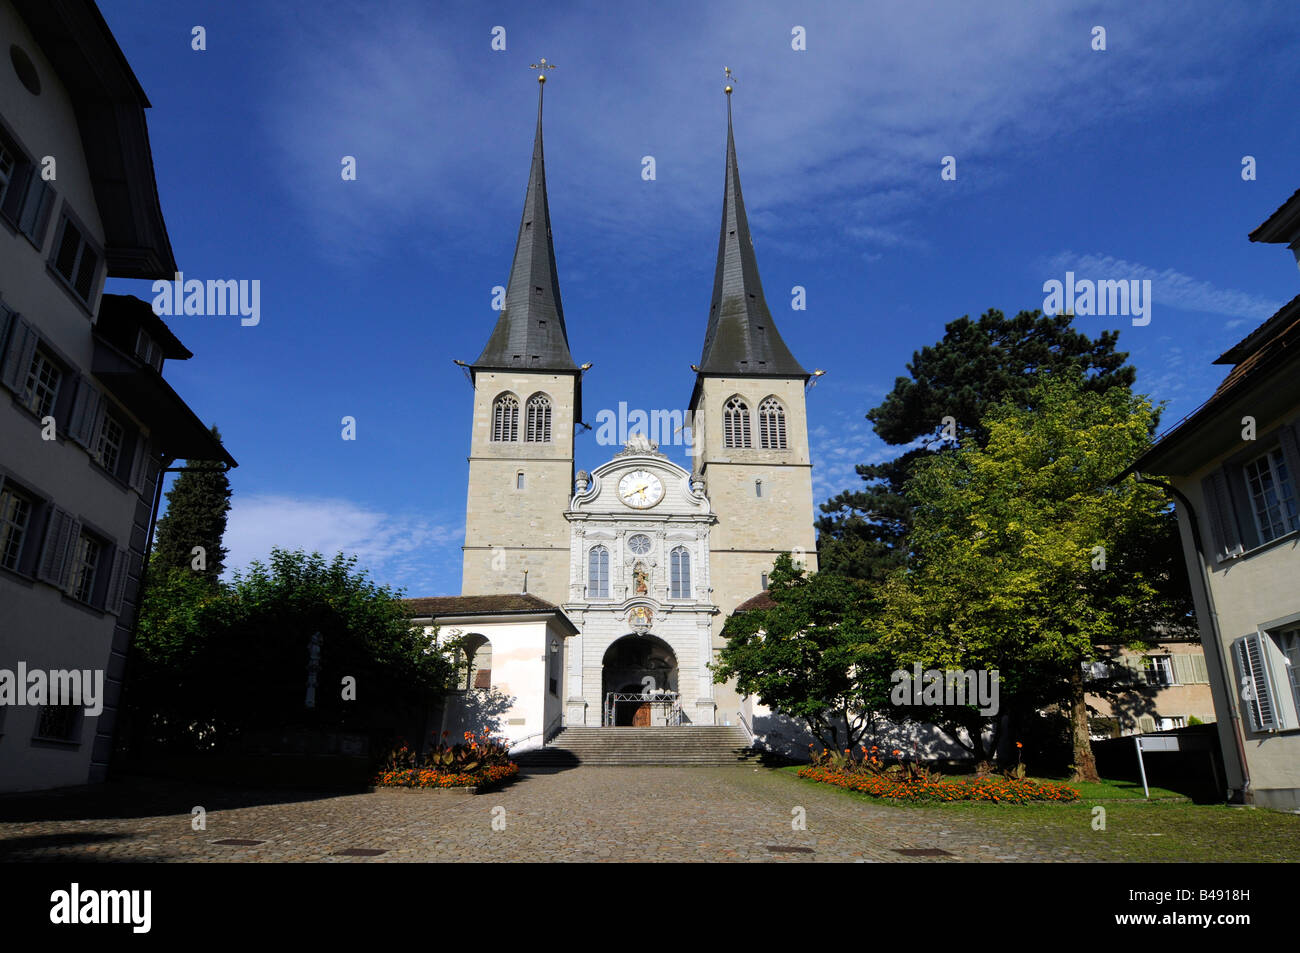 The Hof Church, one of the most beautiful church in Lucerne, central Switzerland. Stock Photo